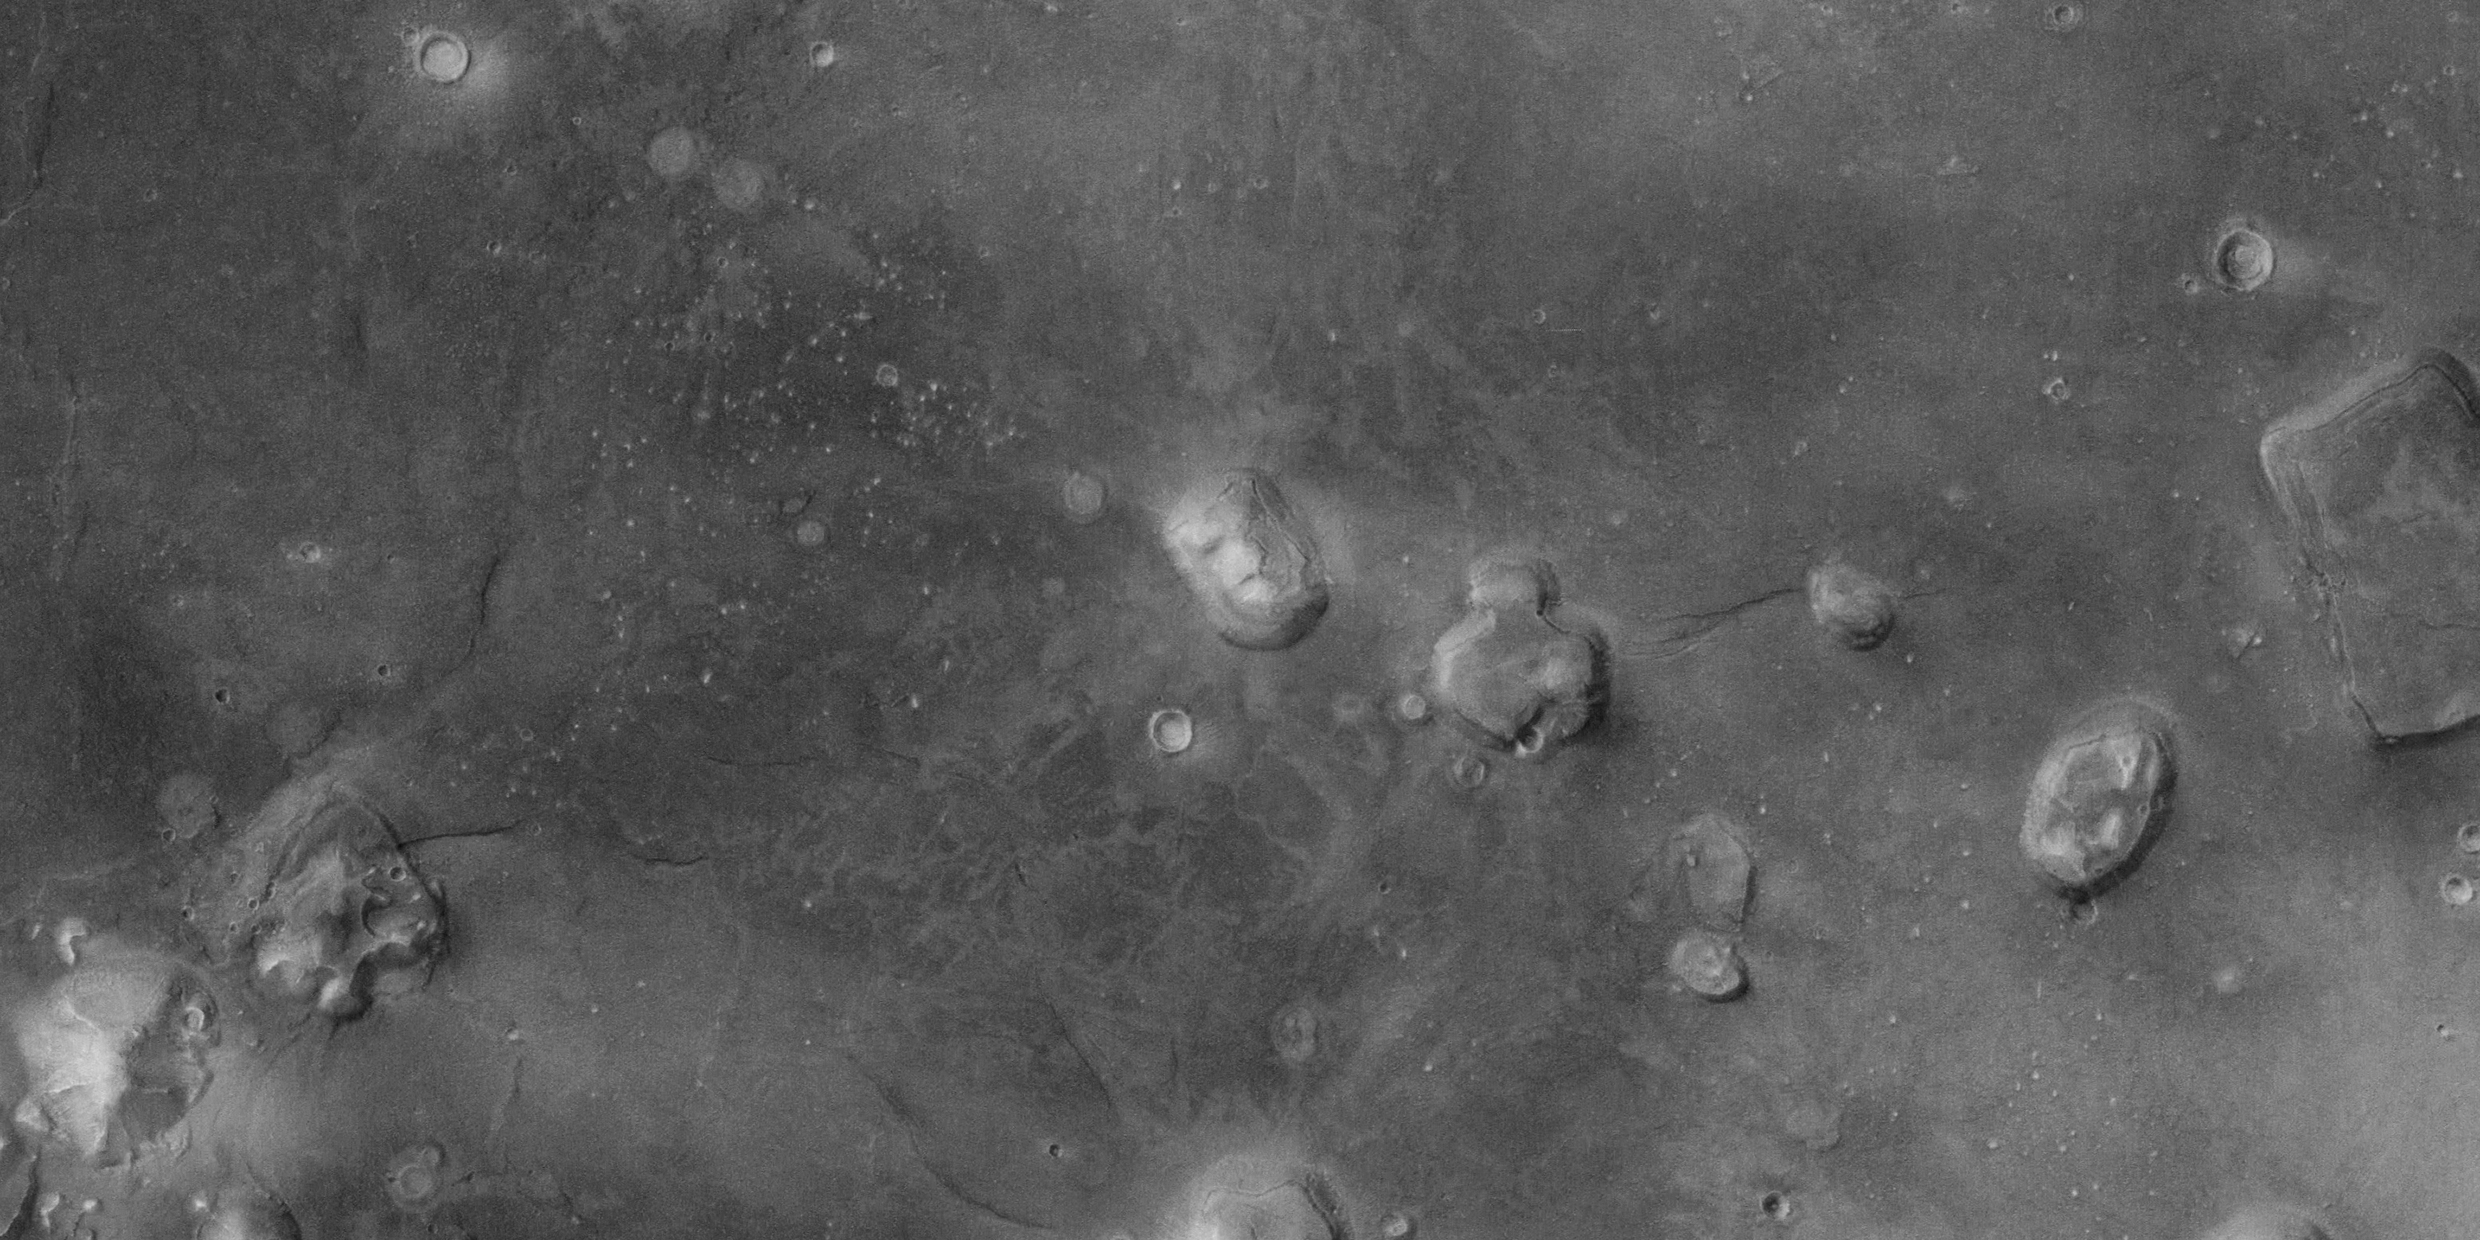 Astronomical image of the surface of Mars